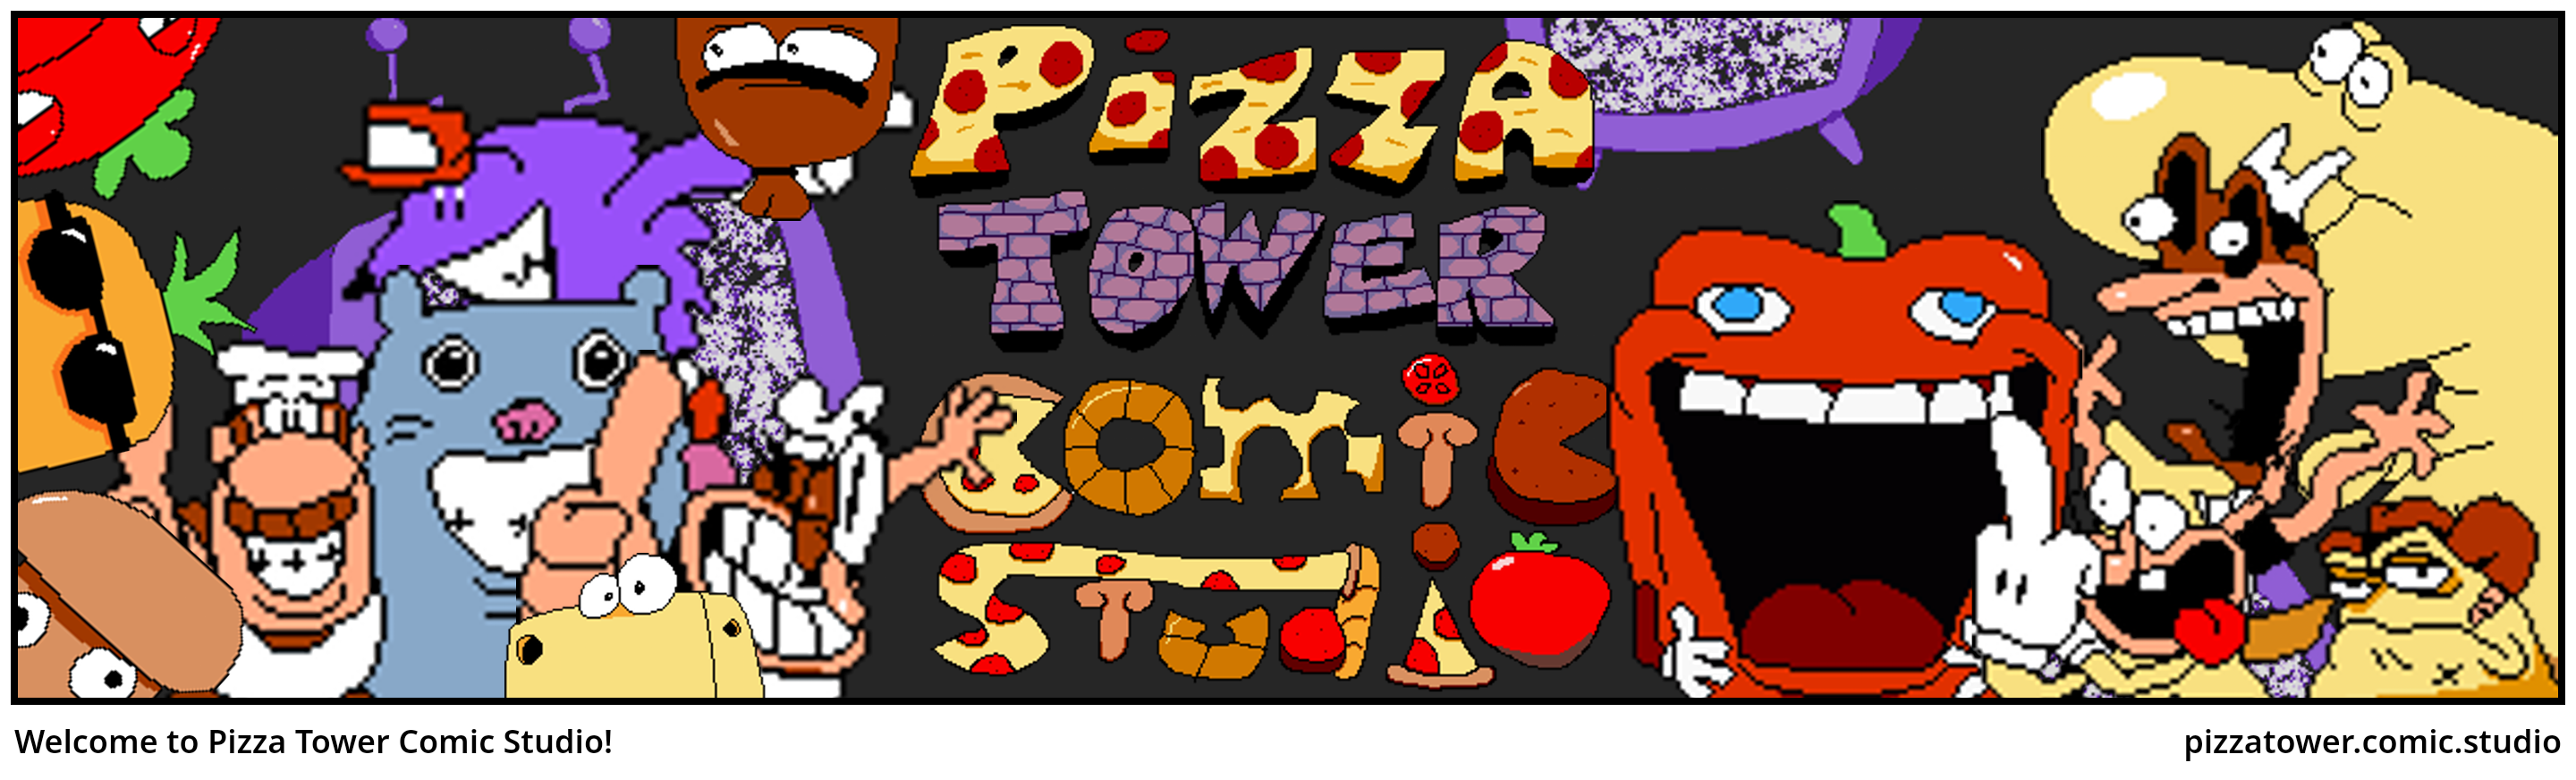 Welcome to Pizza Tower Comic Studio!